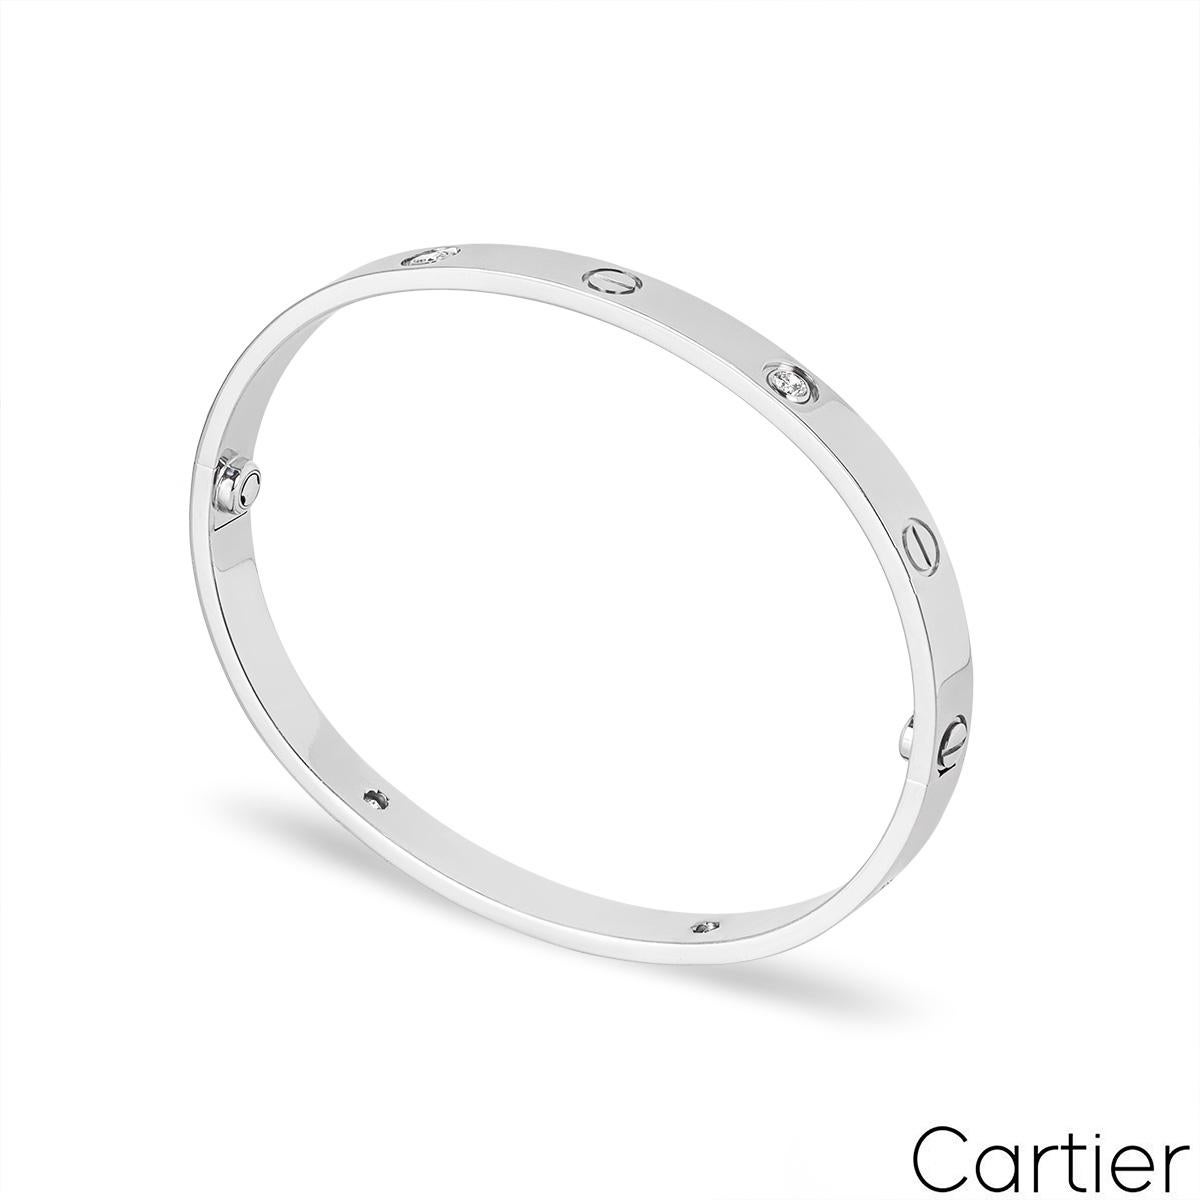 An 18k white gold Cartier half diamond bracelet from the Love collection. The bracelet comprises of the iconic screw motifs on the outer edge alternating with 4 round brilliant cut diamonds, with a total weight of 0.42ct. The bracelet is a size 18